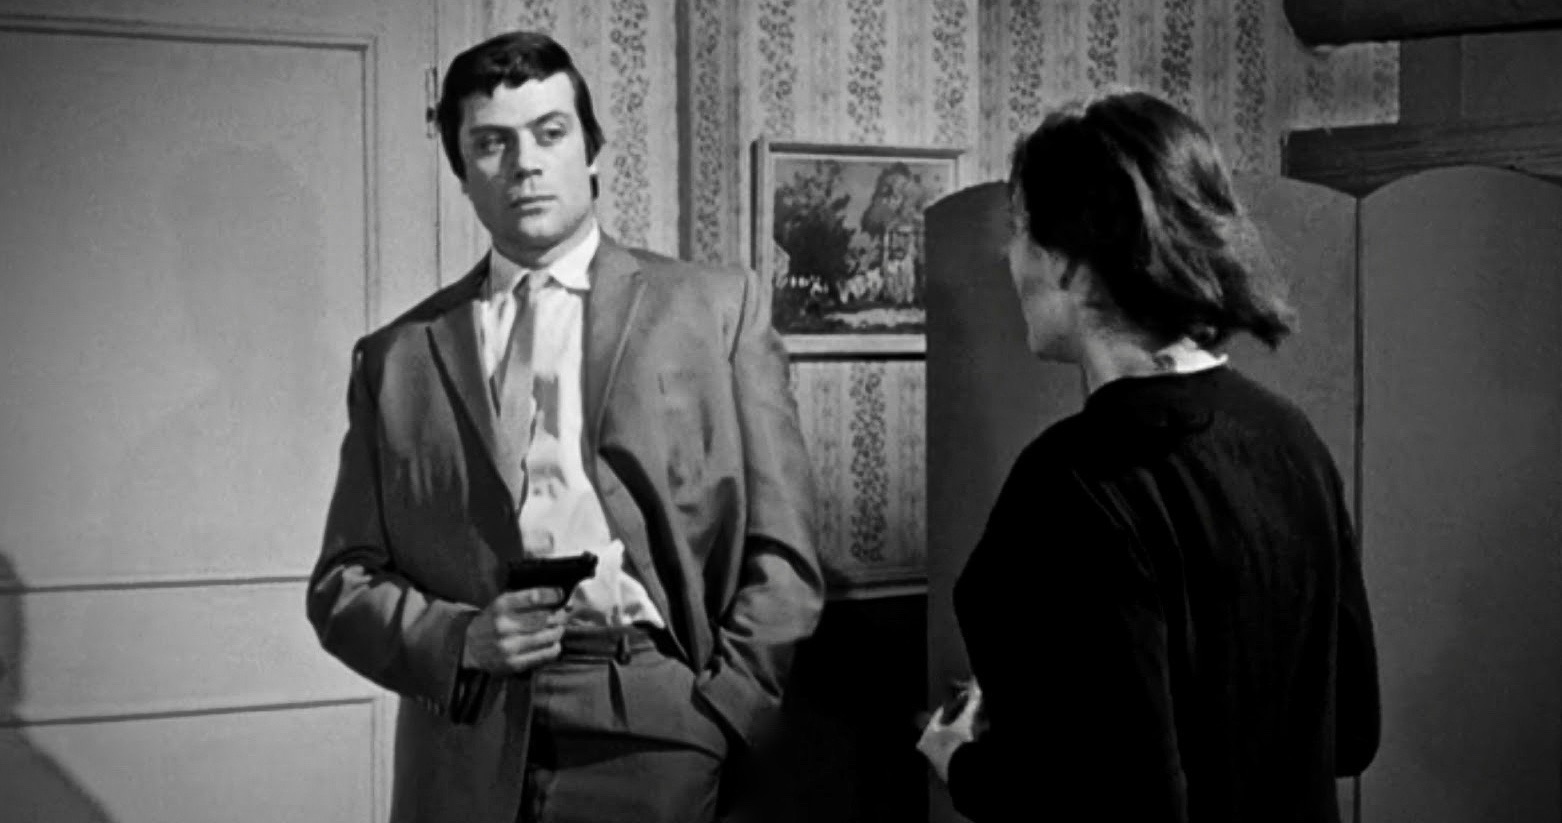 cult film freak: OLIVER REED DOUBLE FEATURE ON 'THE SAINT' WITH